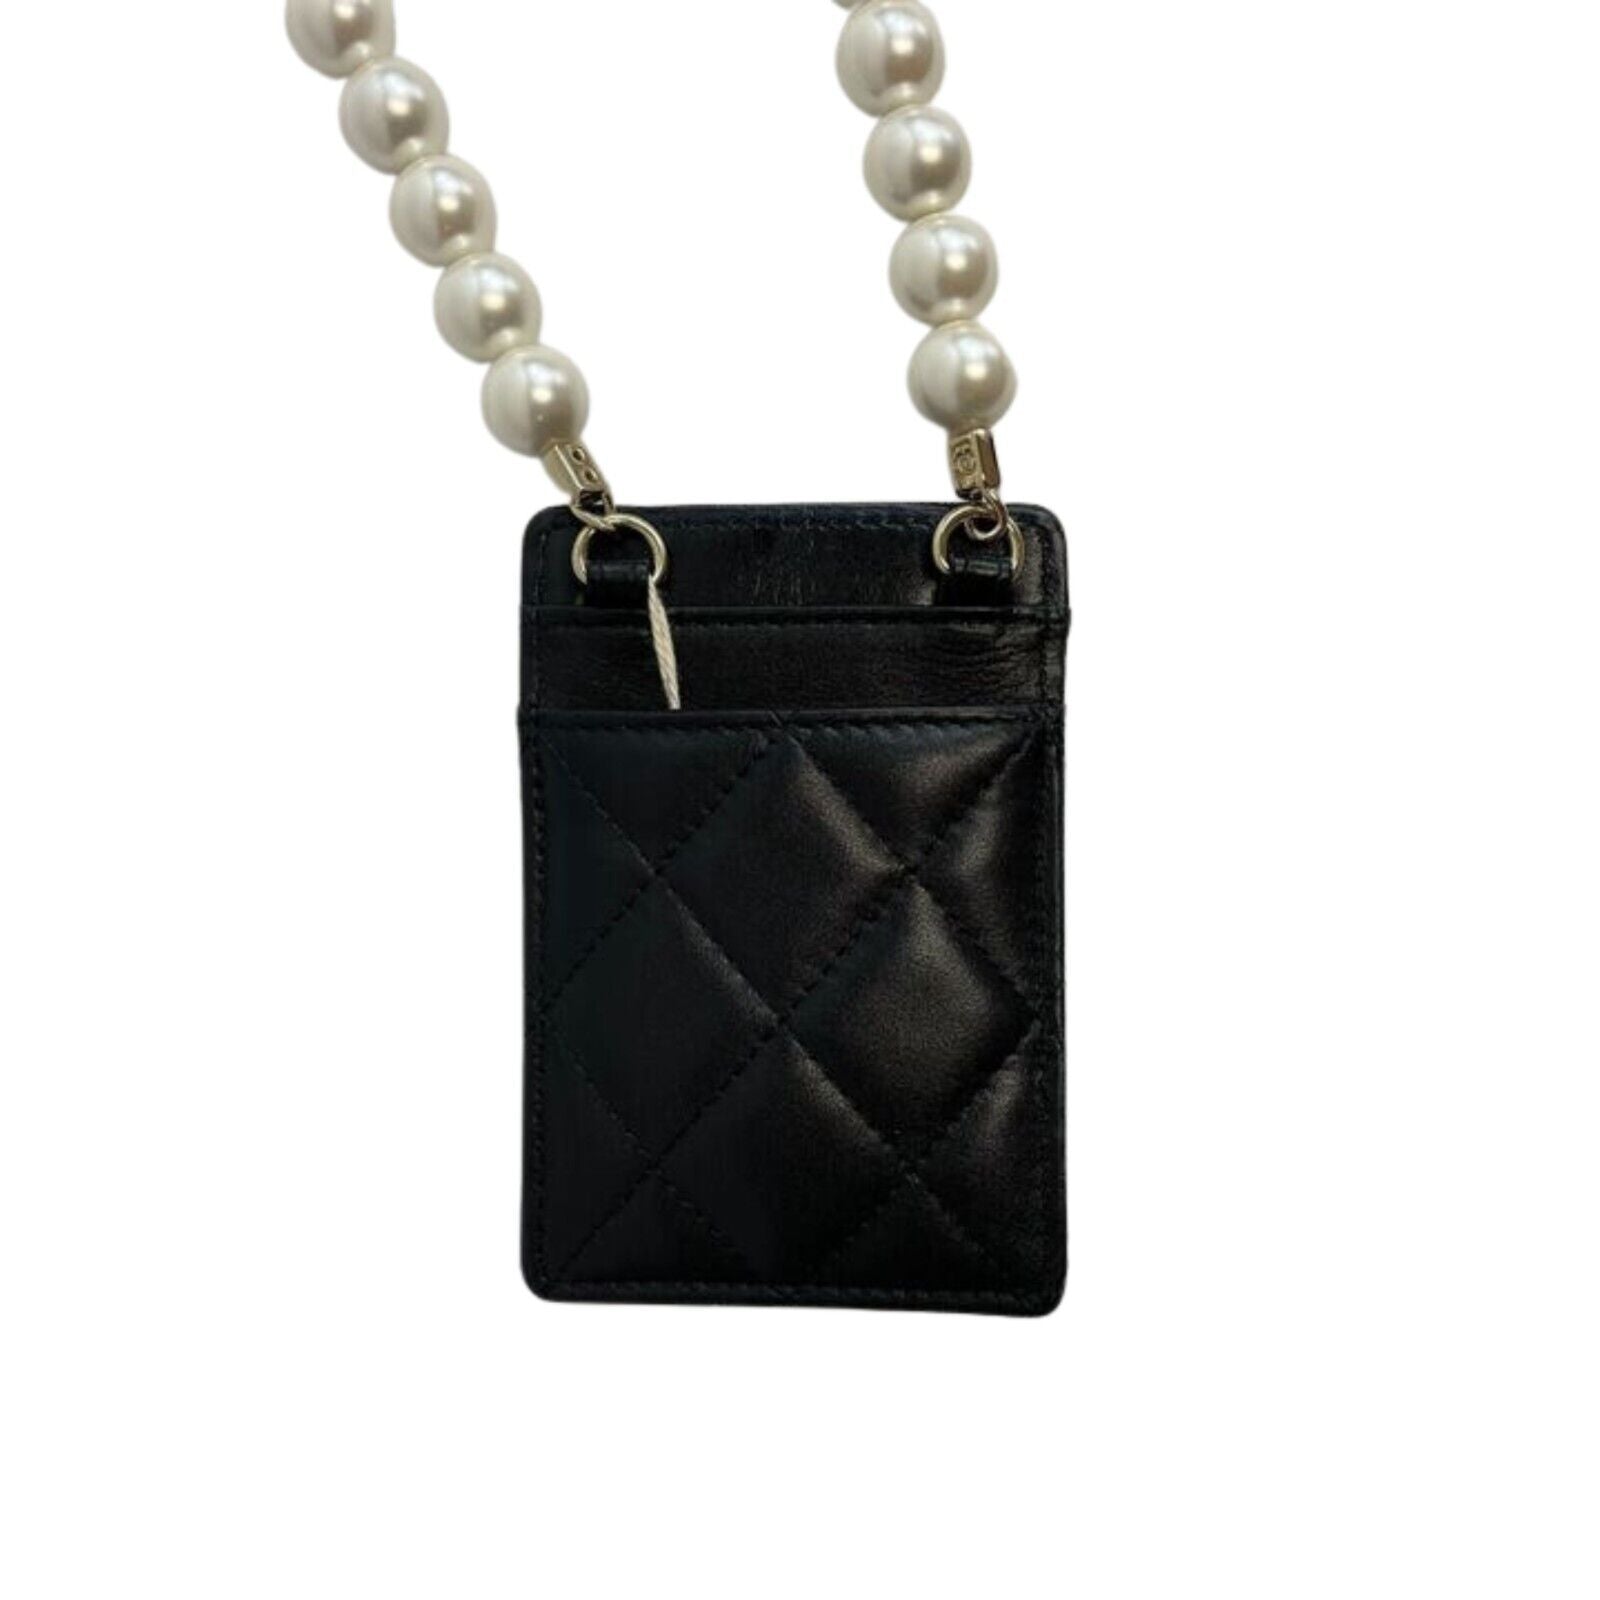 Chanel - CC Card Holder with Pearl Chain Shoulder Strap